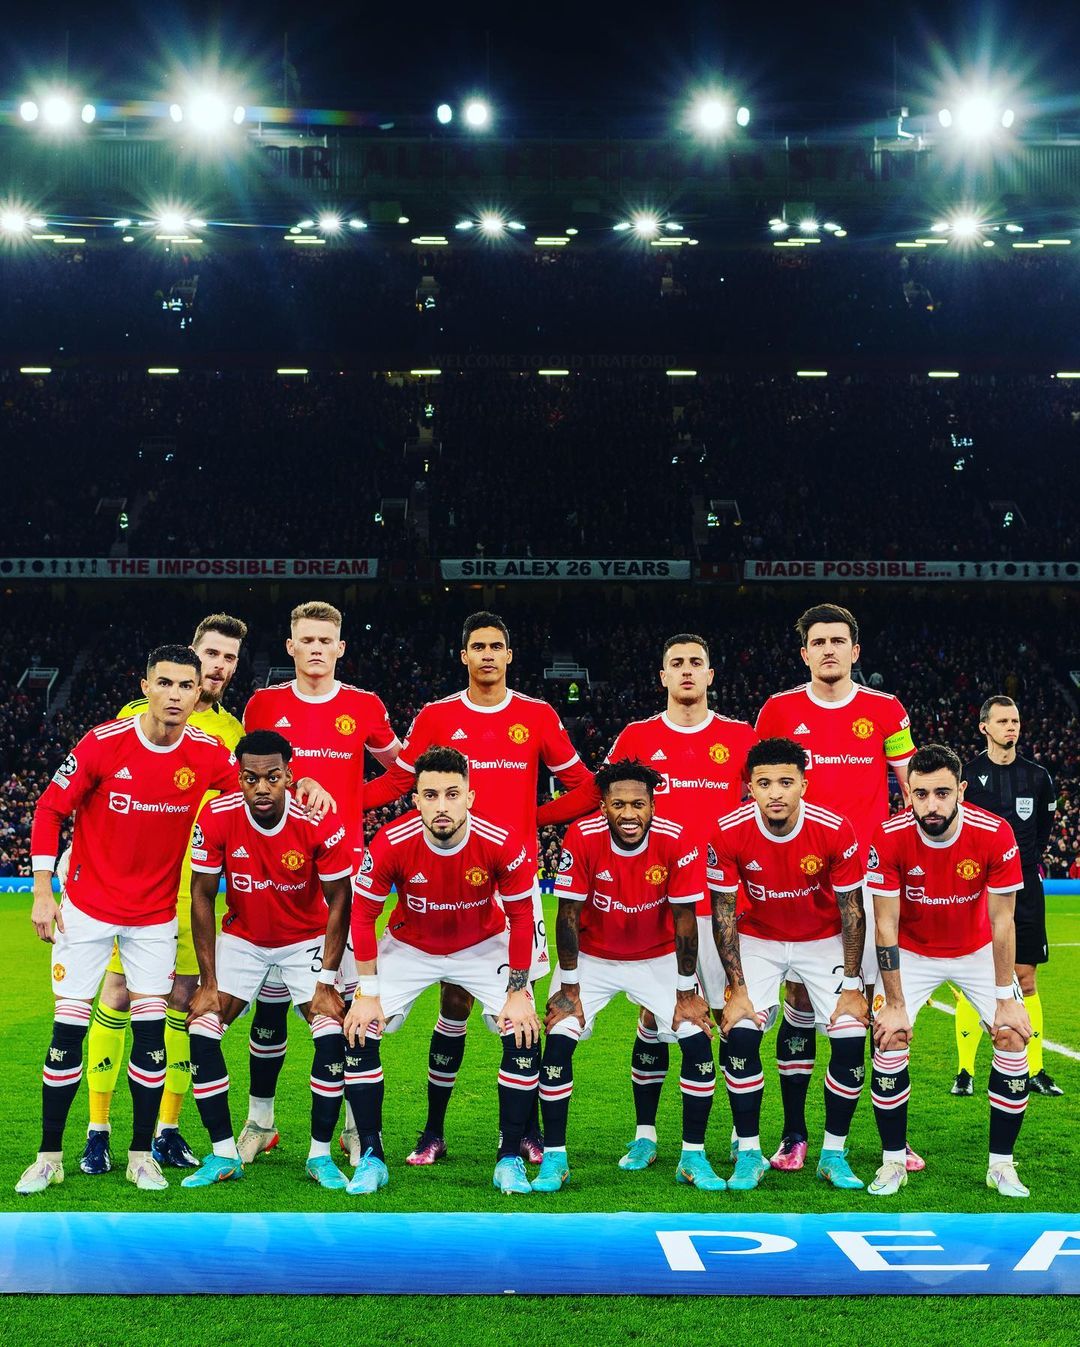 MANCHESTER UNITED HAVE THE TOP EARNERS in Mars